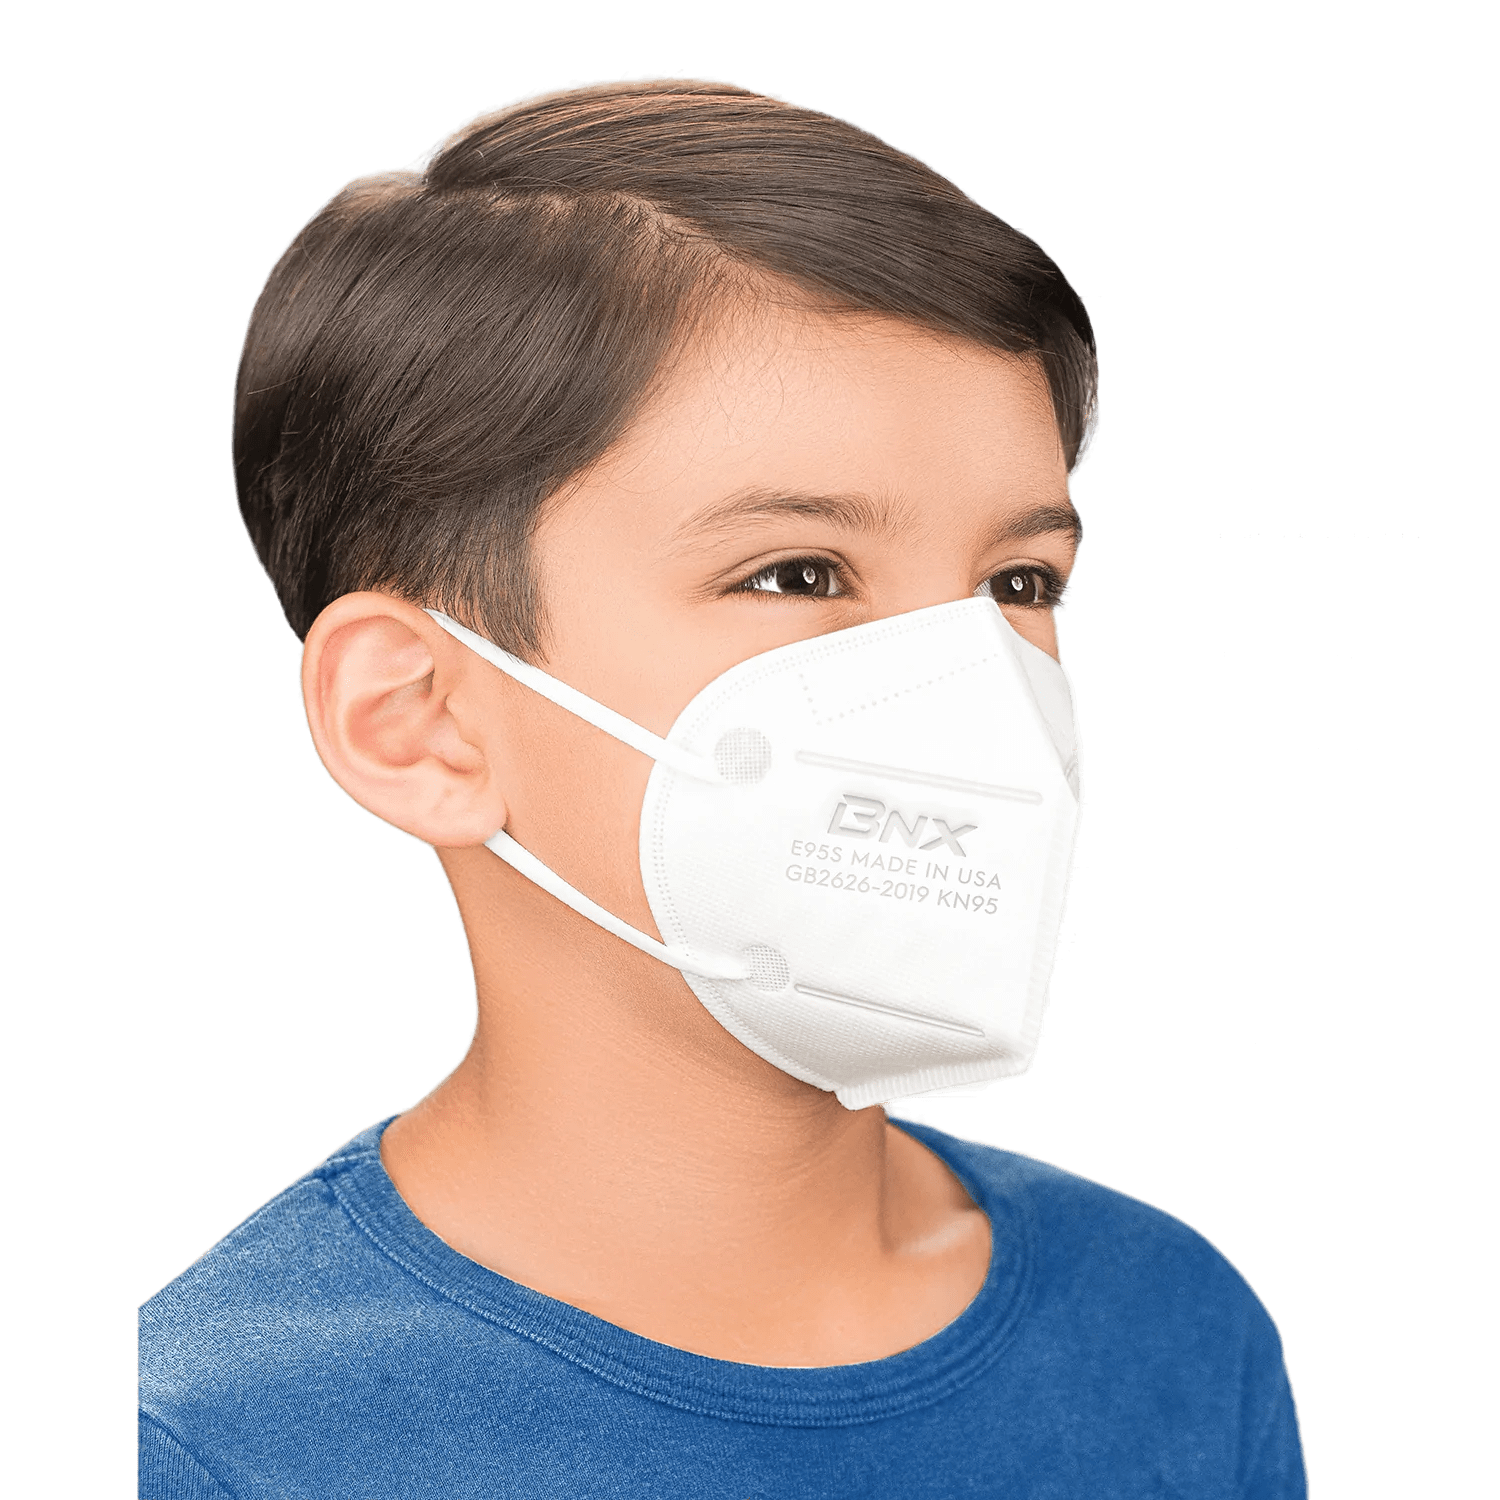 Kids Mask Guide  Learn with Project N95